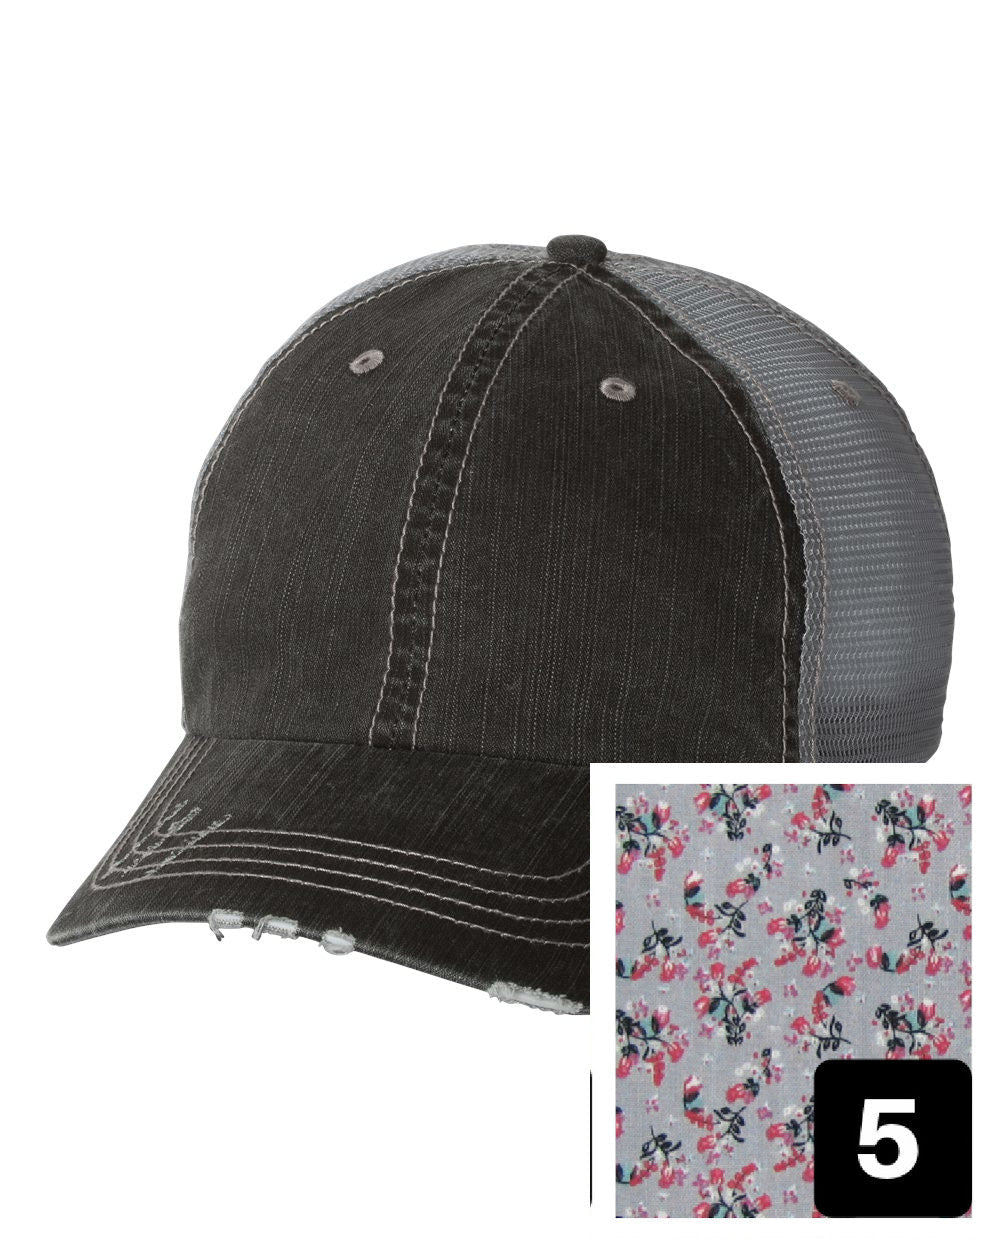 gray distressed trucker hat with purple and pink floral fabric state of Ohio